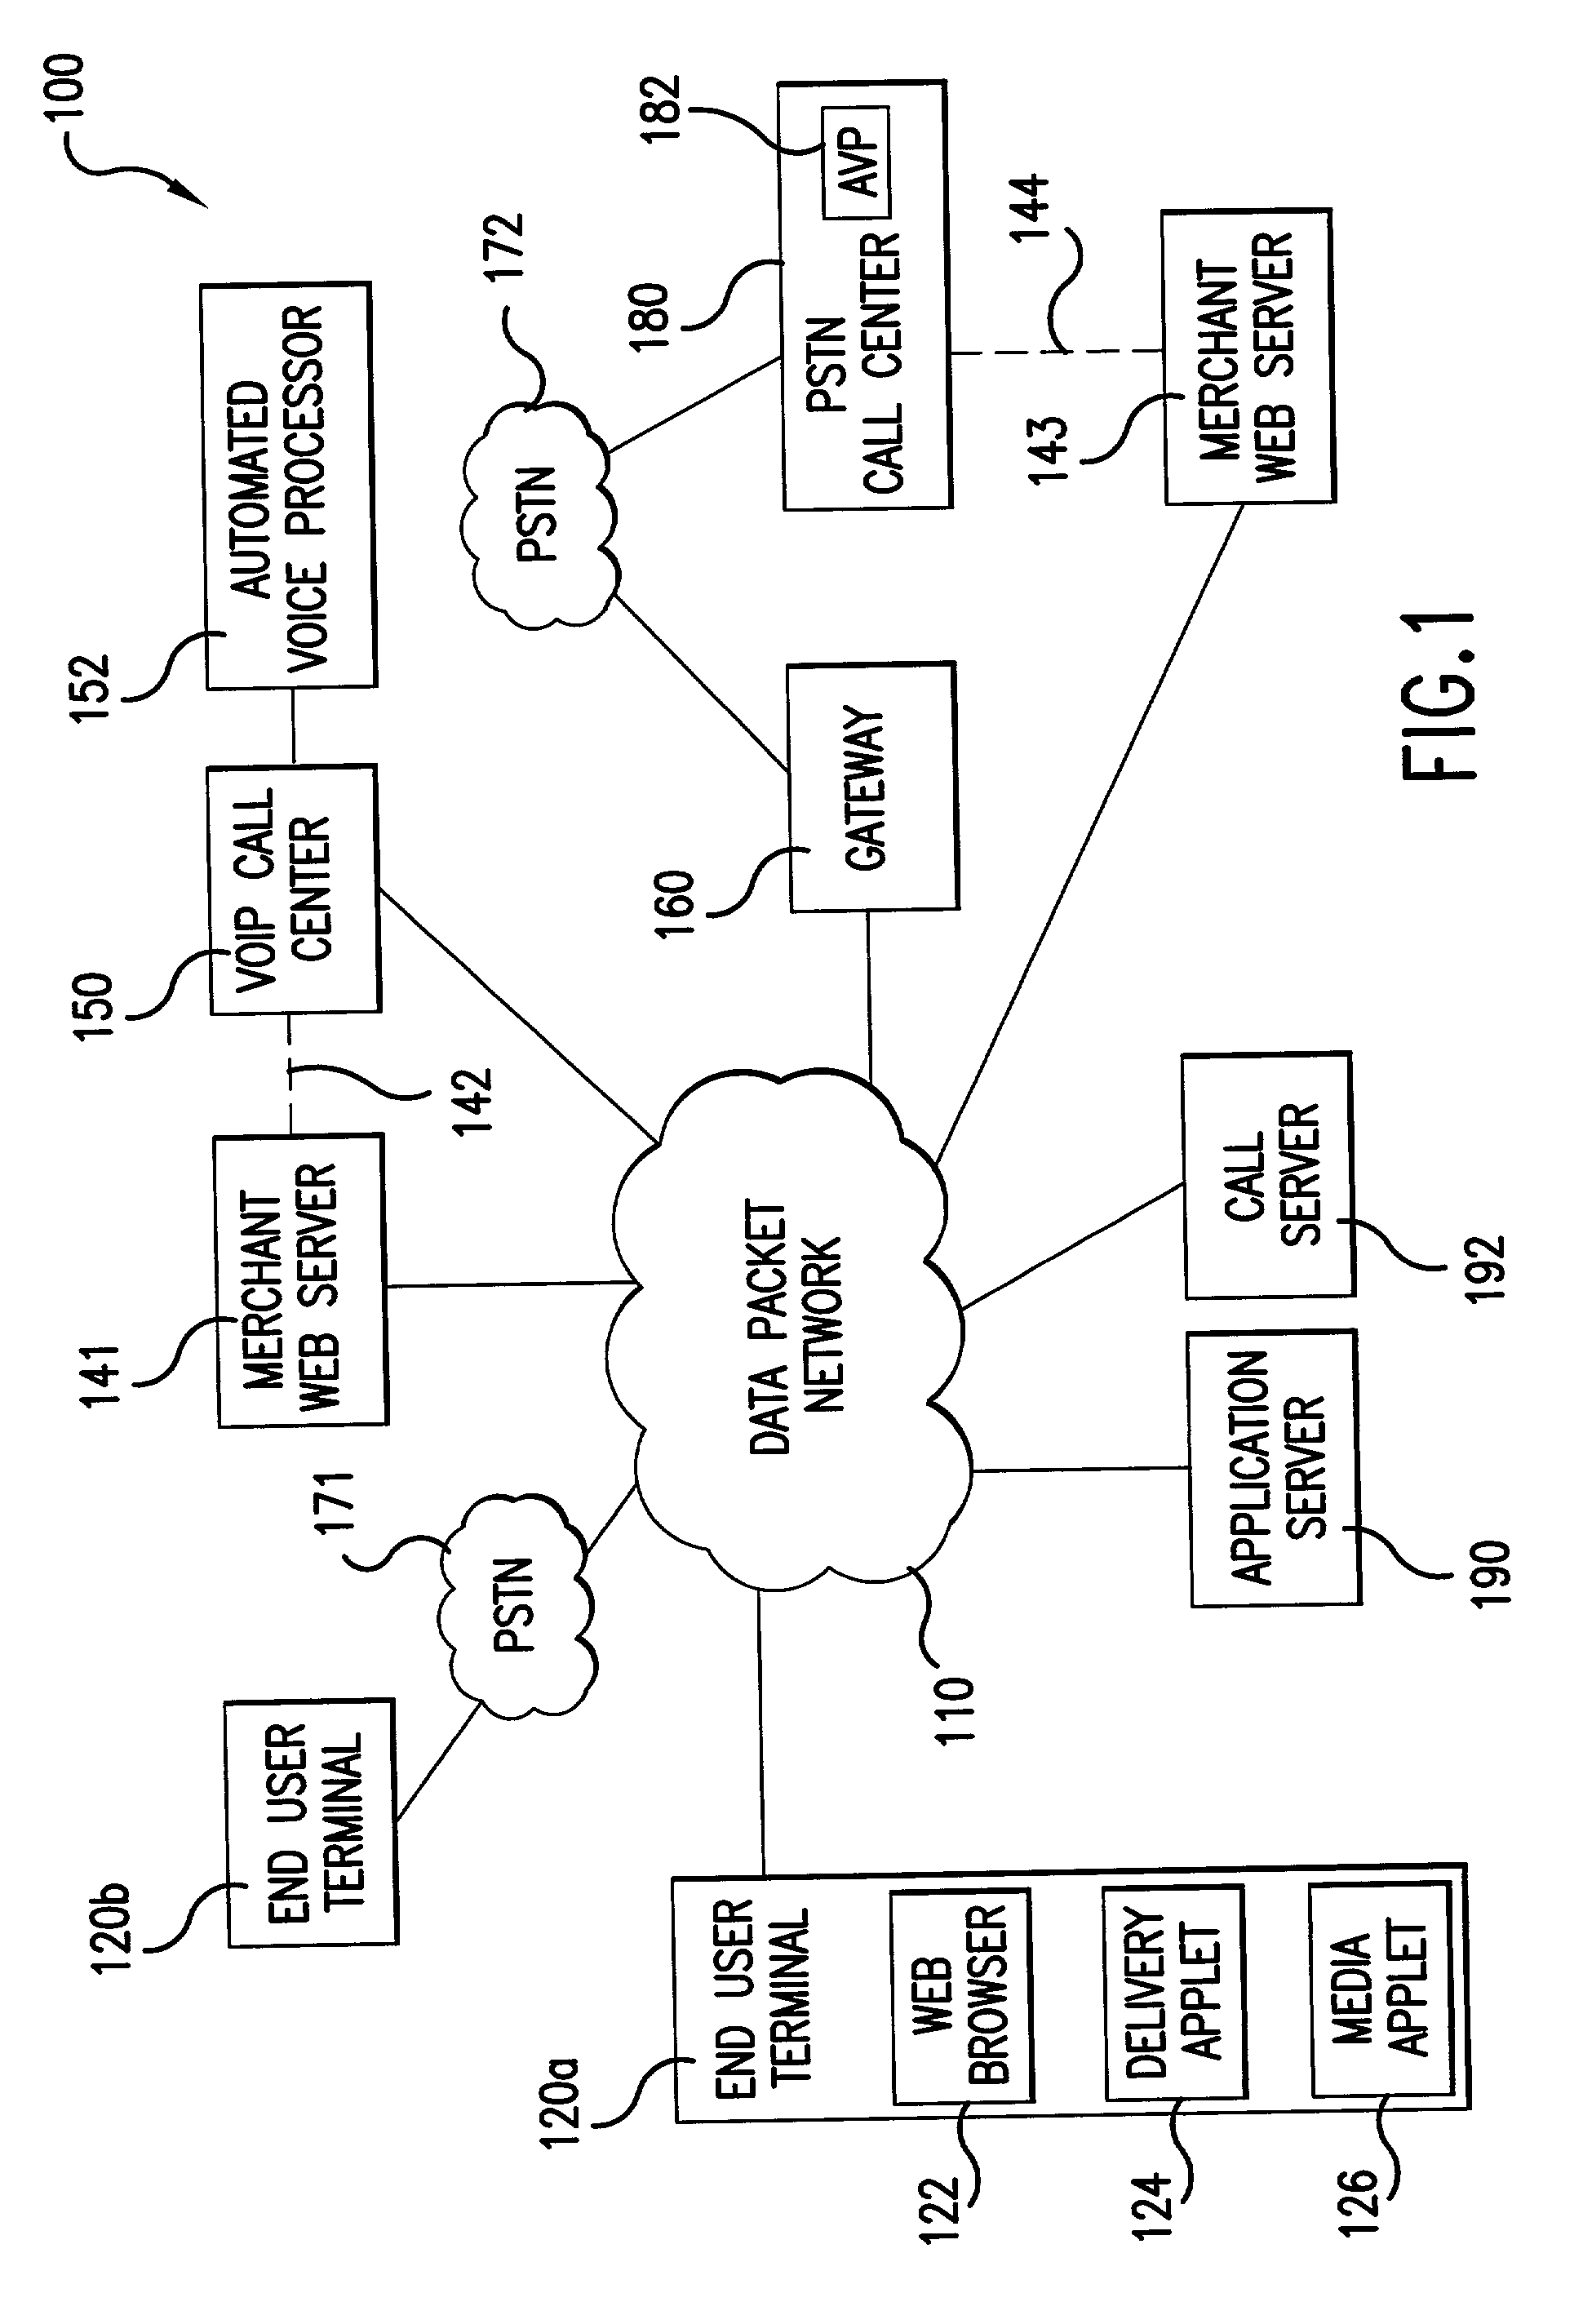 Voice-controlled data/information display for internet telephony and integrated voice and data communications using telephones and computing devices